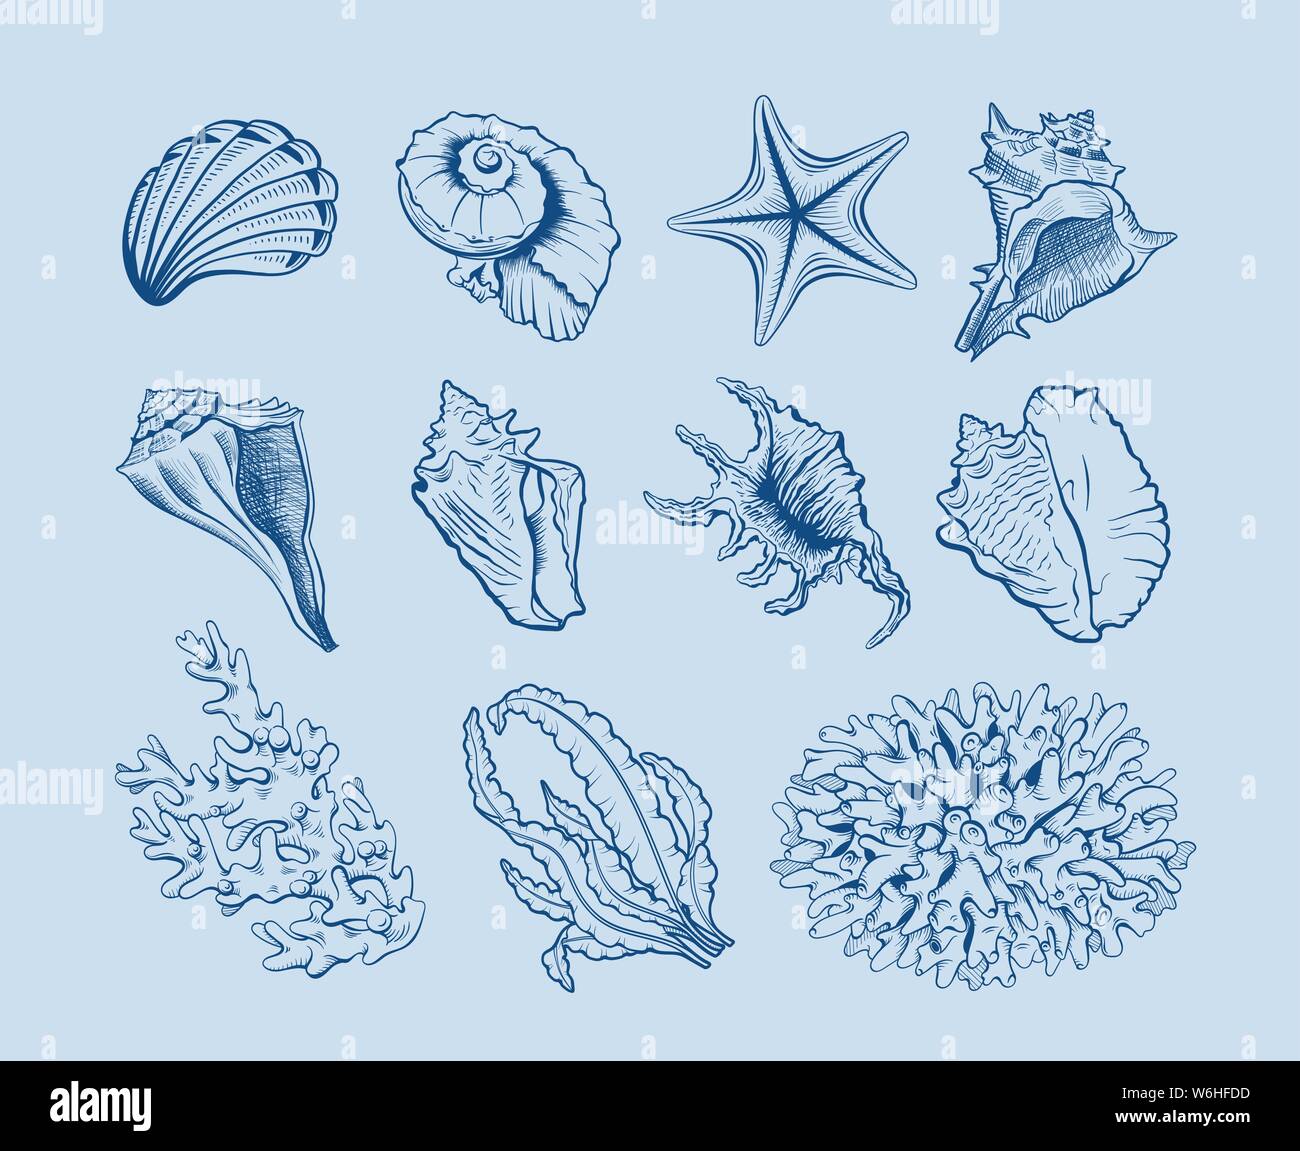 Marine life hand drawn vector illustration set. Seashells, scallops freehand drawings on blue background. Corals, reef ecosystem fauna, seaweeds, lami Stock Vector